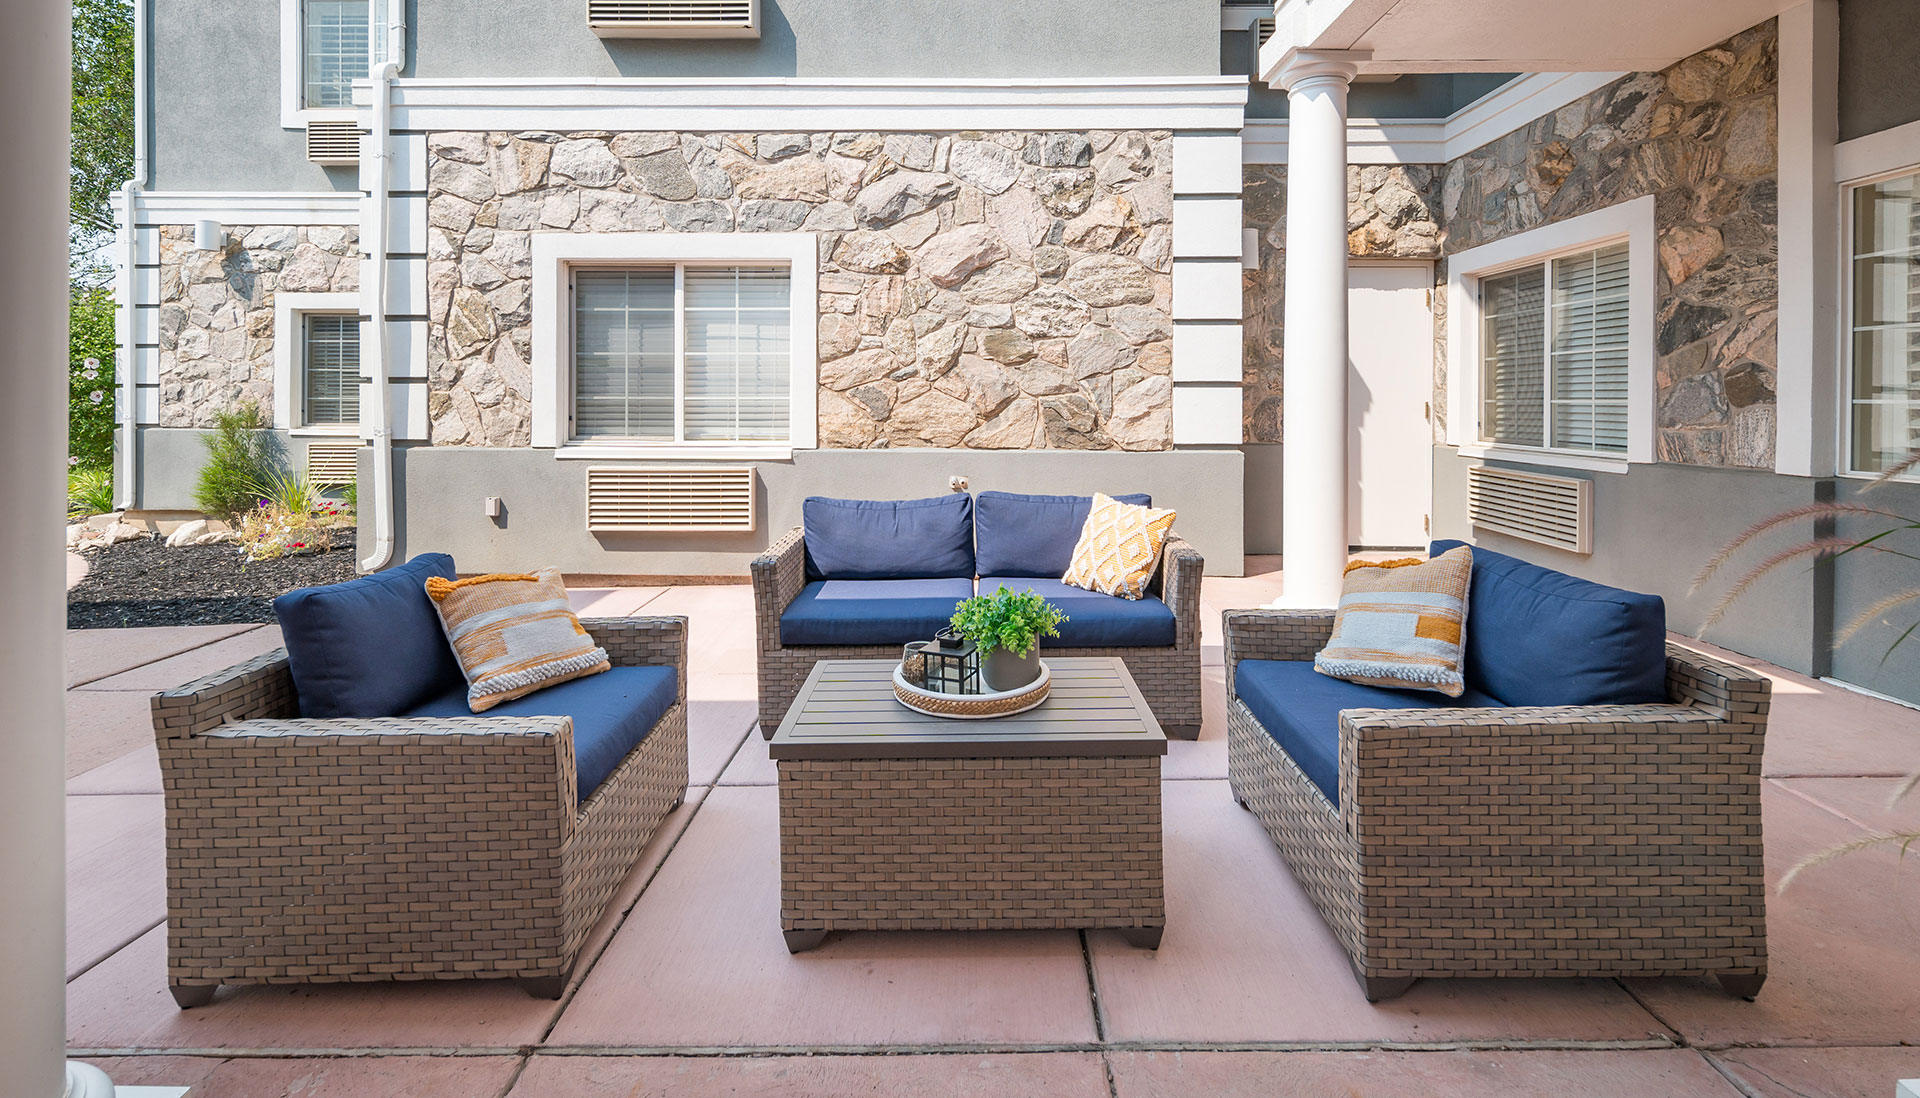 Outdoor patio area featuring comfortable seats and accent pillows